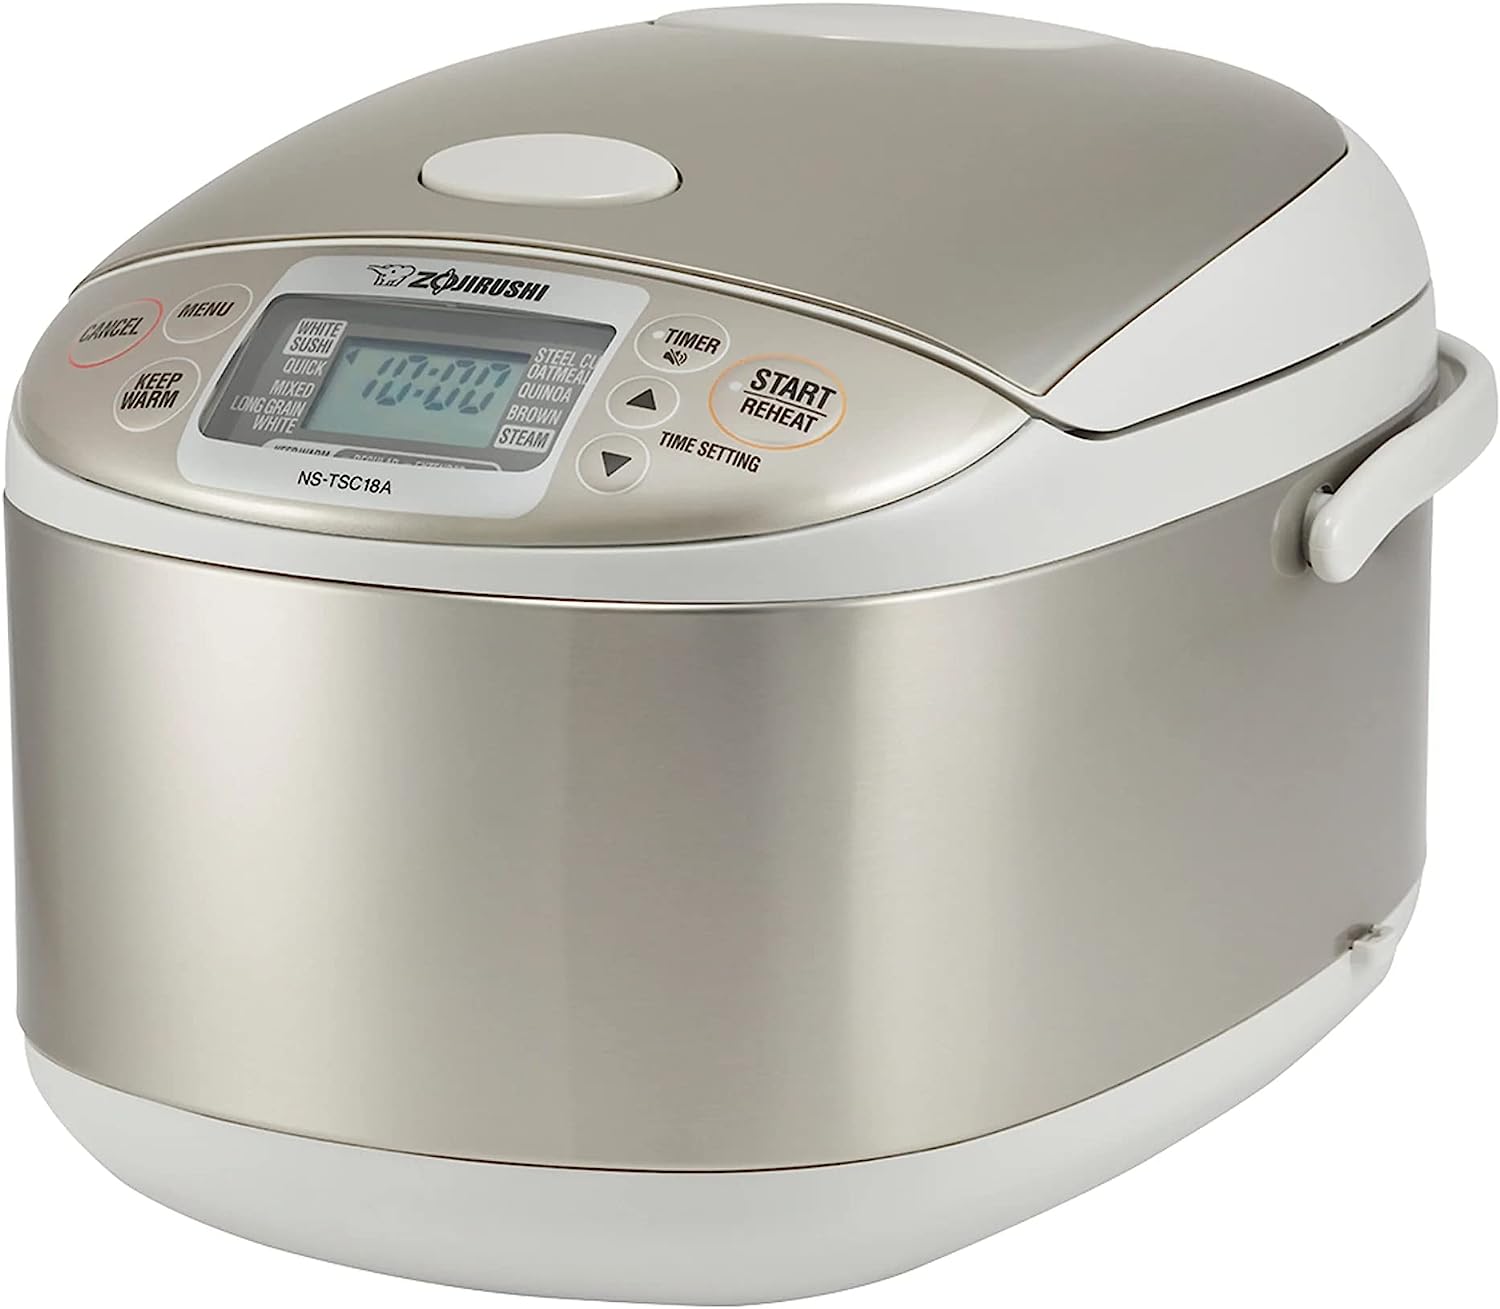 Zojirushi Micom Rice Cooker and Warmer, 10-Cup (Uncooked)